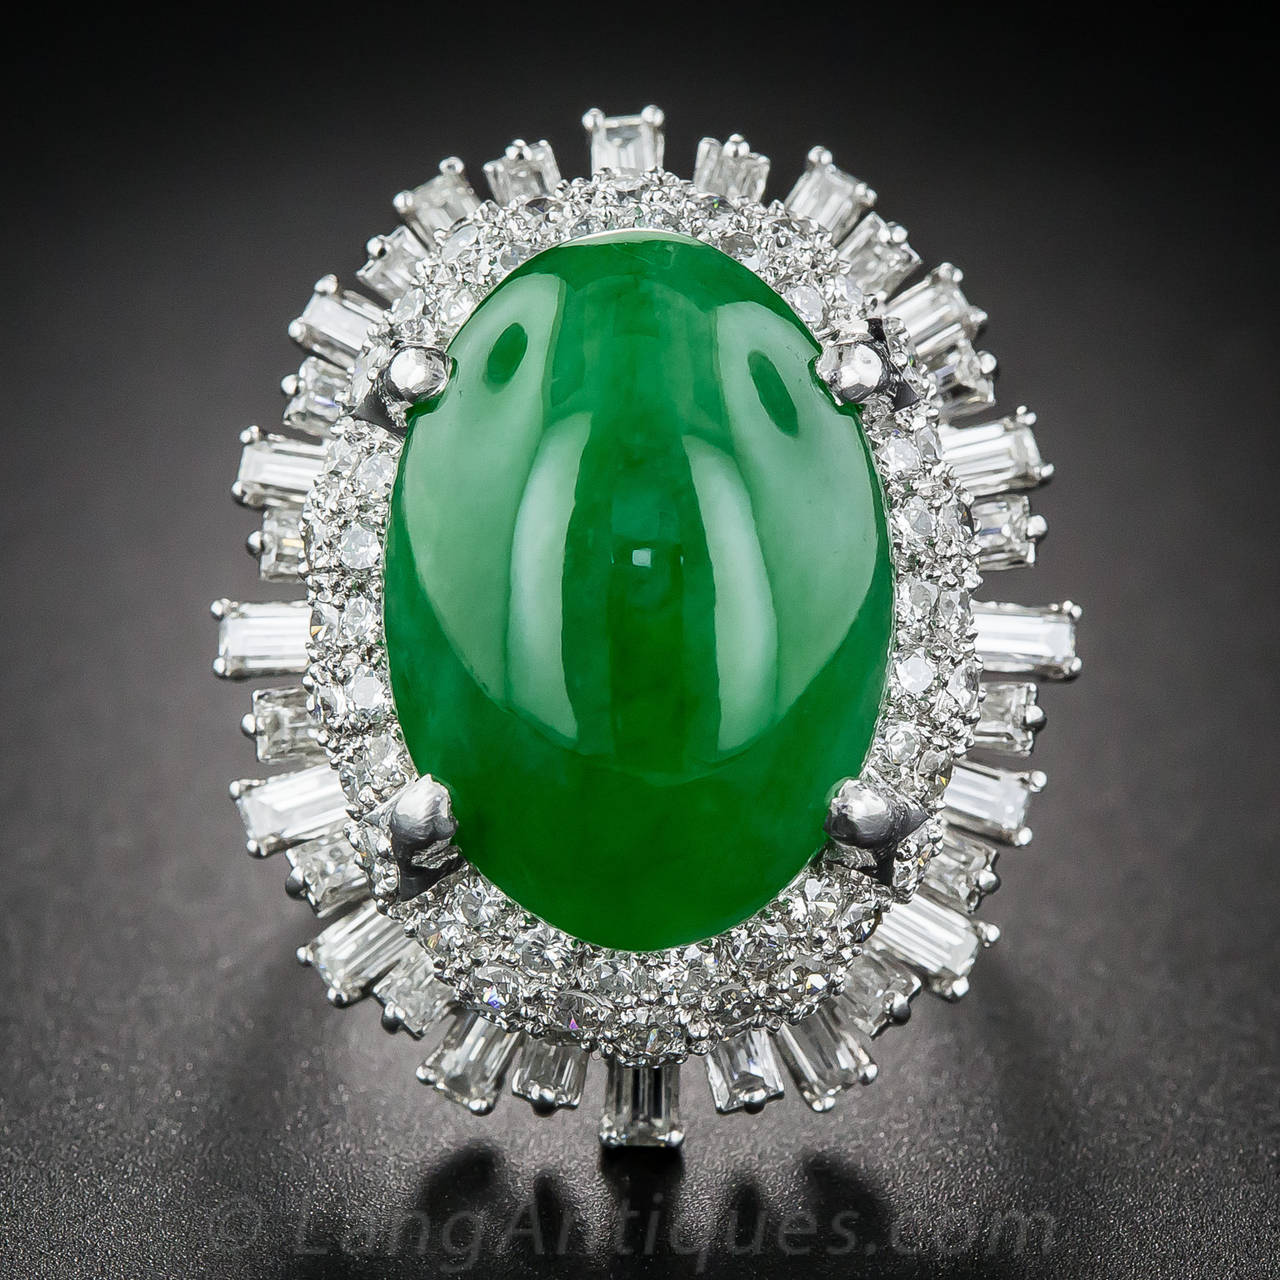 By way of mid-twentieth century Asia, most likely Hong Kong, comes this impressively proportioned cocktail ring, crafted in platinum and highlighting a vibrant, richly saturated, grassy green, oval cabochon jadeite, measuring 18.38 x 13.05 x 6.79